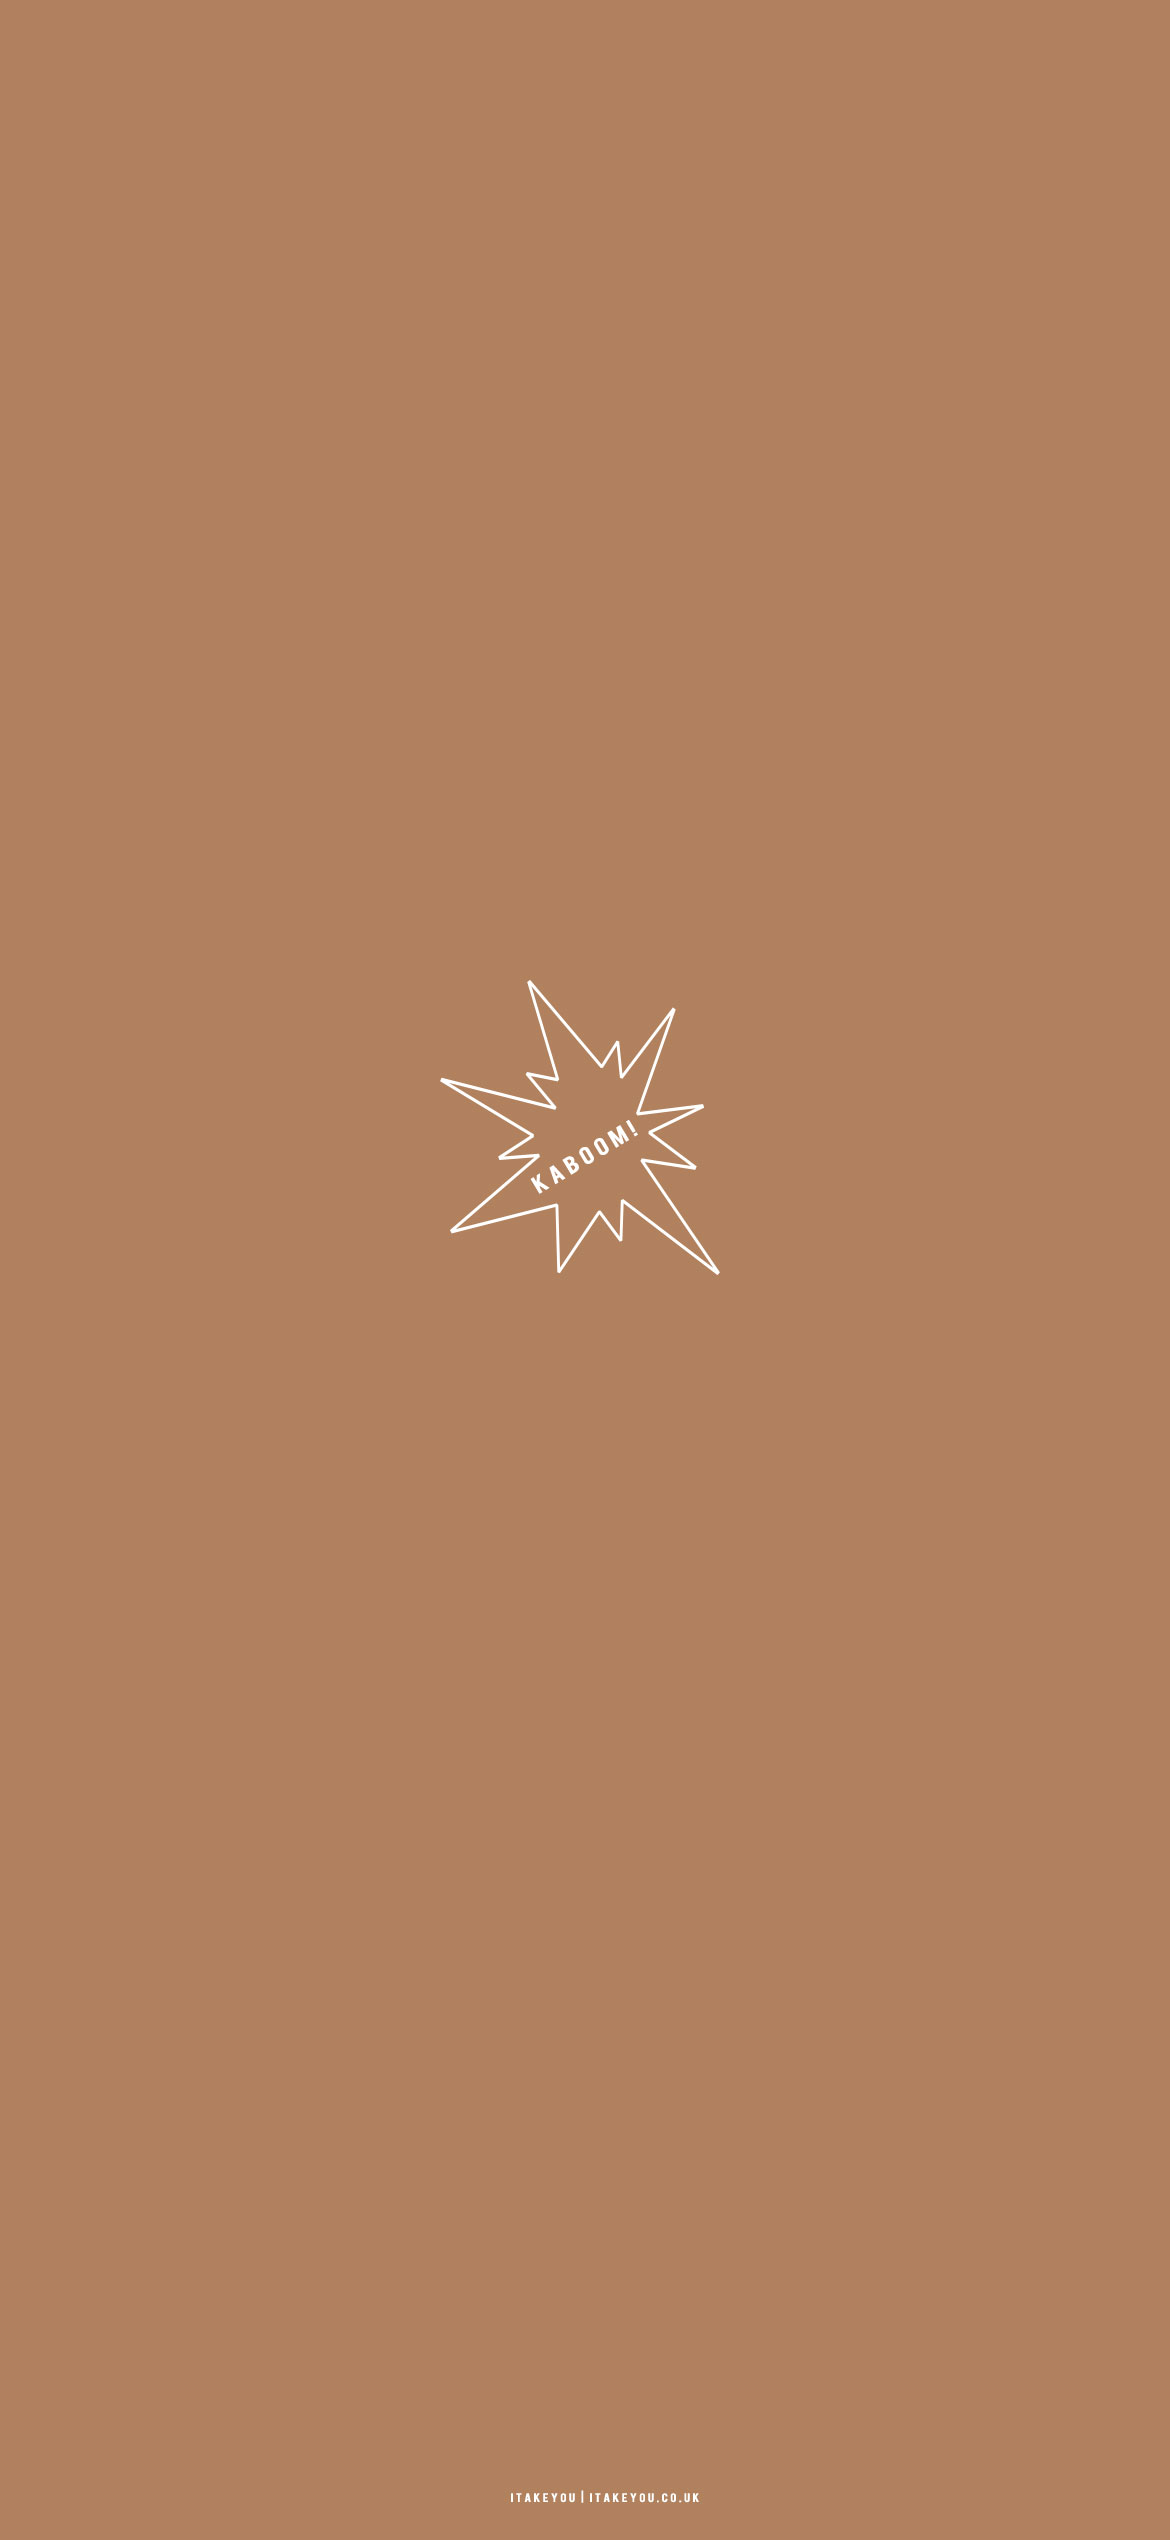 Free download 20 Minimalist Brown Wallpaper iPhone Ideas for iPhone Kaboom I [1170x2540] for your Desktop, Mobile & Tablet. Explore Aesthetic Brown iPhone Wallpaper